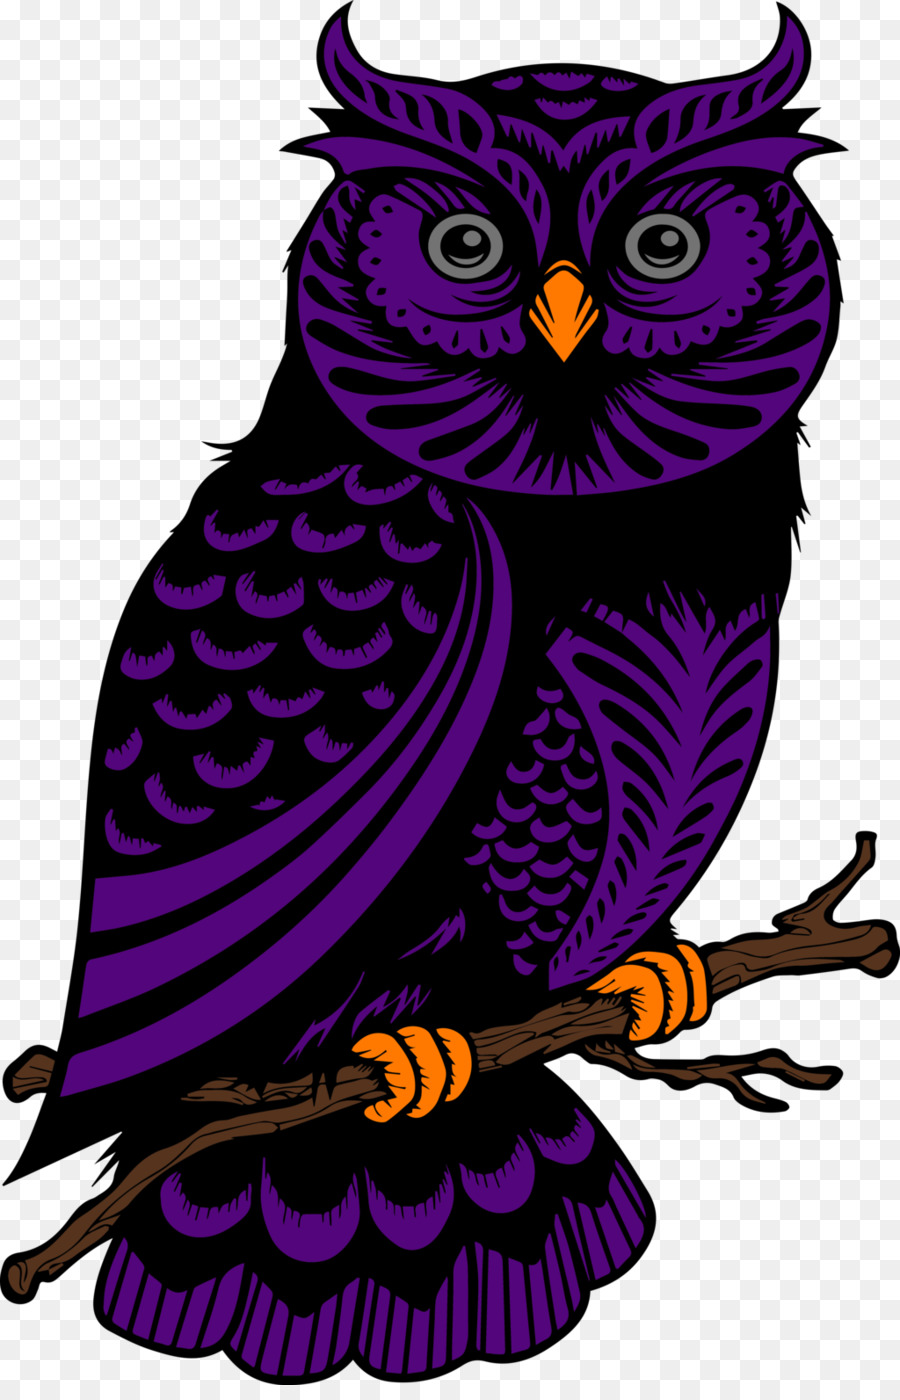 Owl Drawing Silhouette - owl png download - 1024*1576 - Free Transparent Owl png Download.